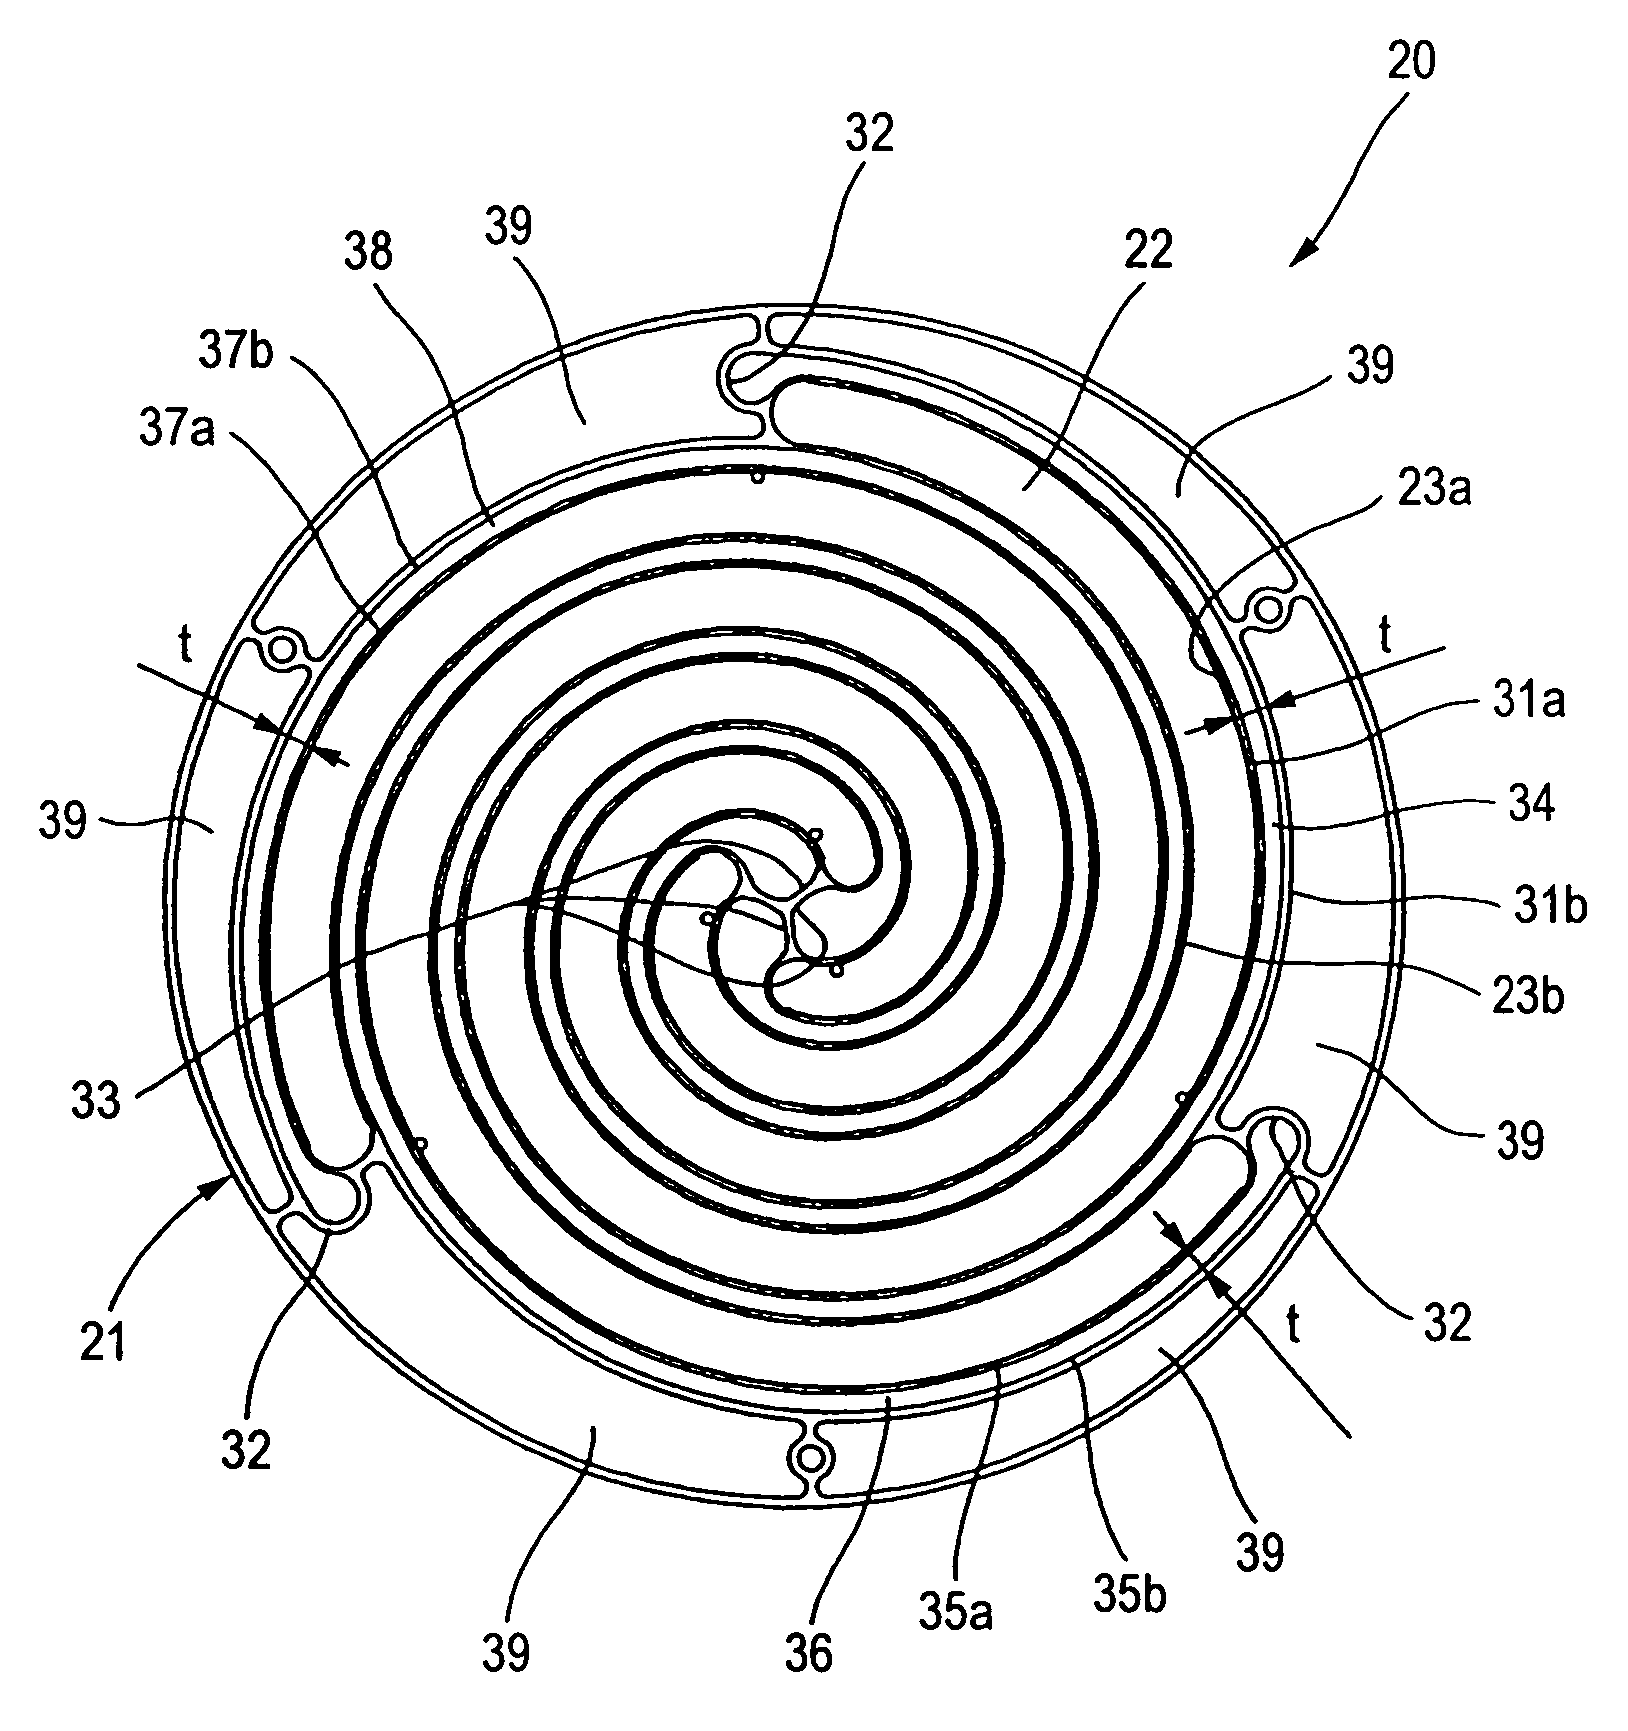 Heat storage apparatus with spiral electrically heated phase change material